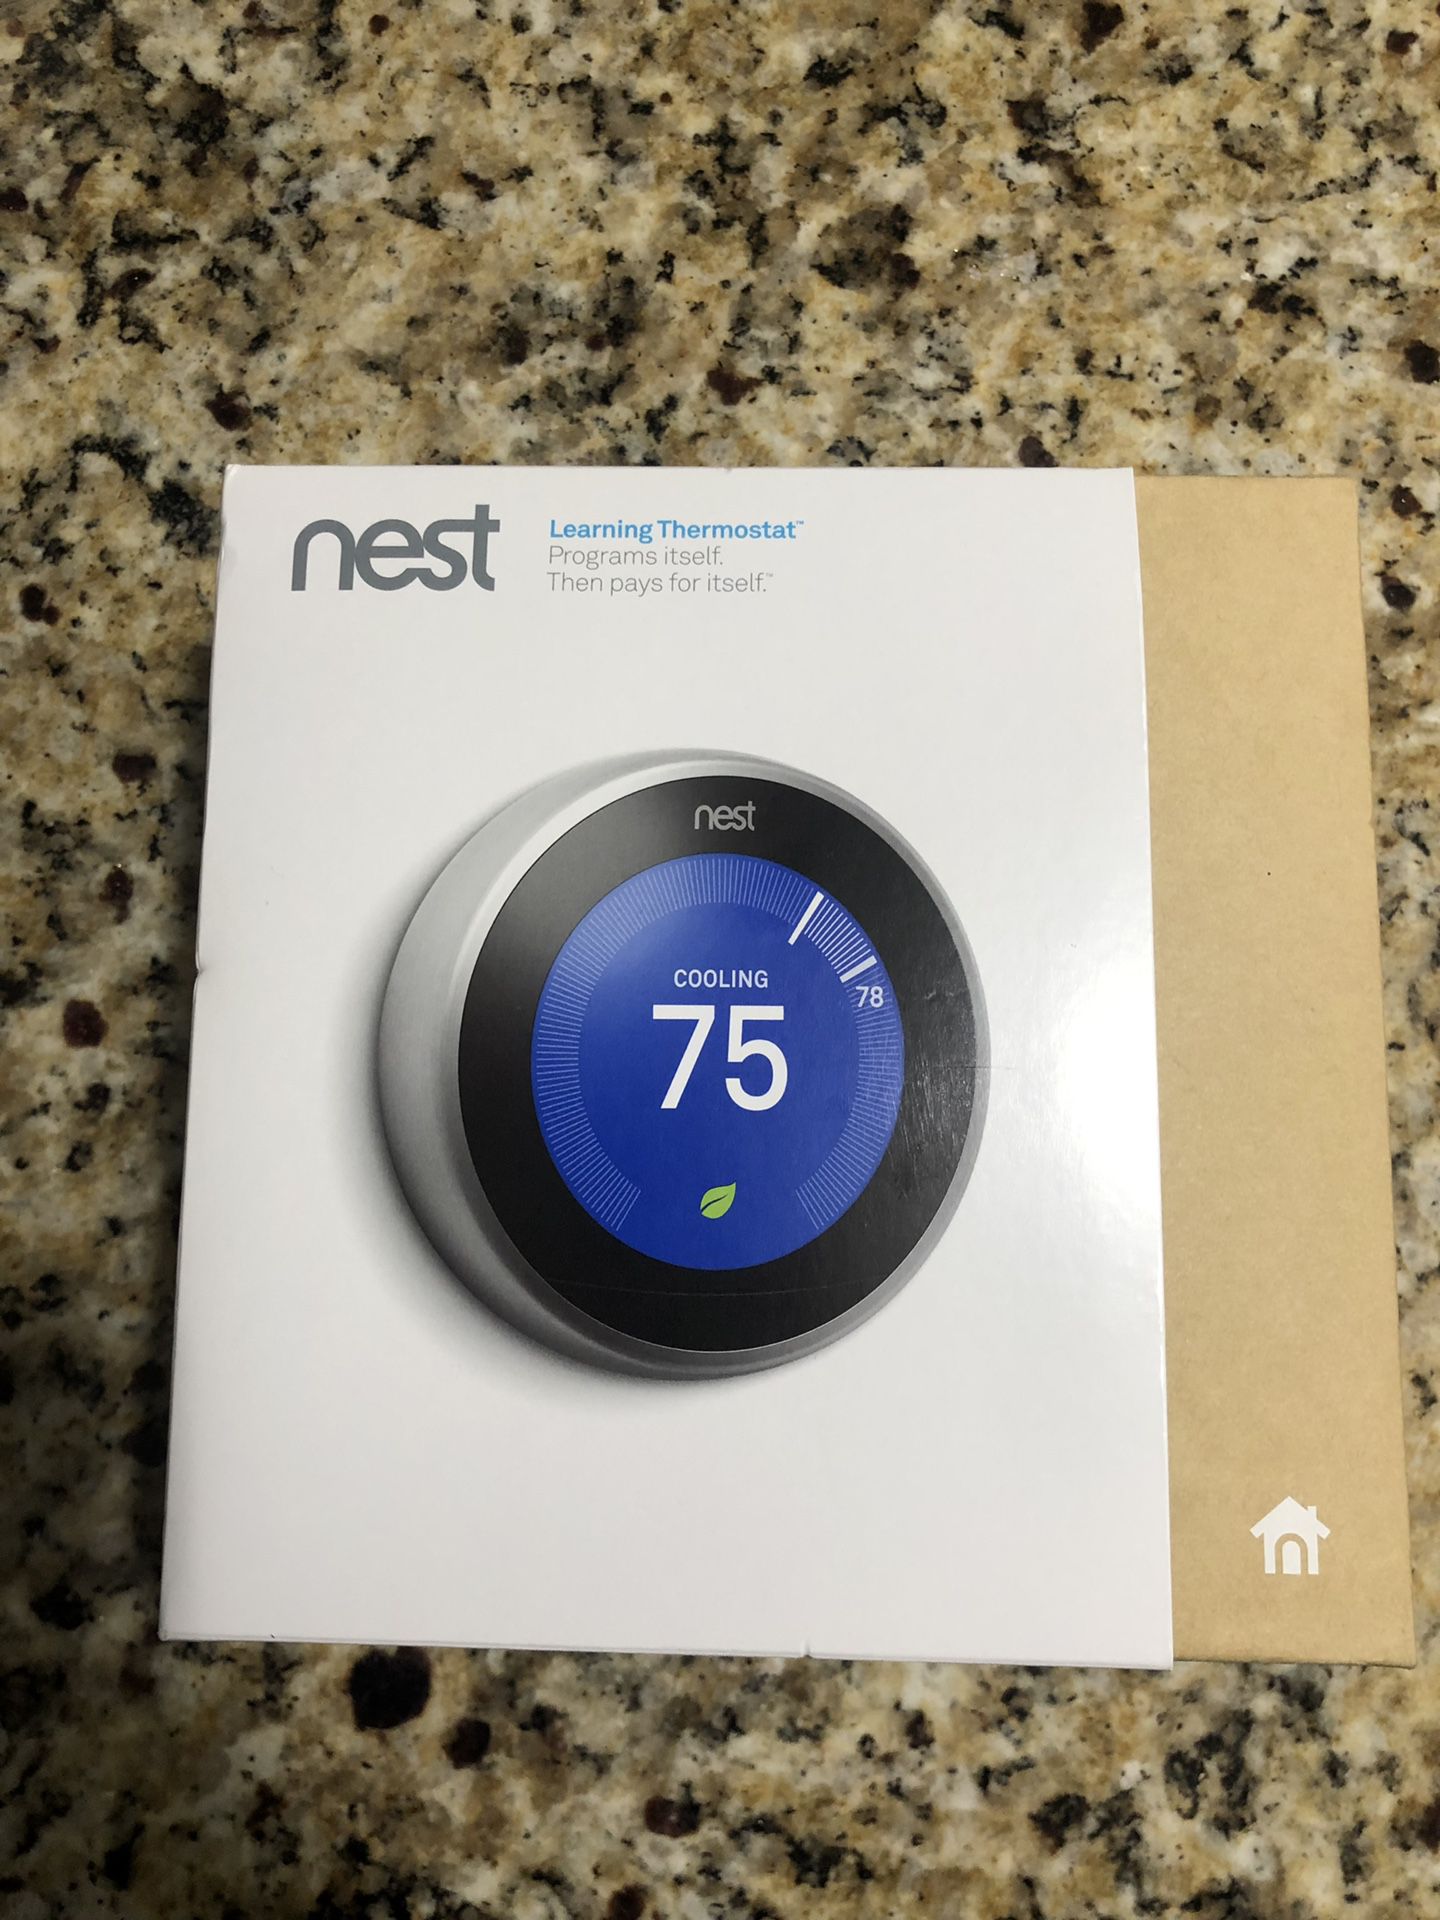 Gently used nest 3rd gen thermostat